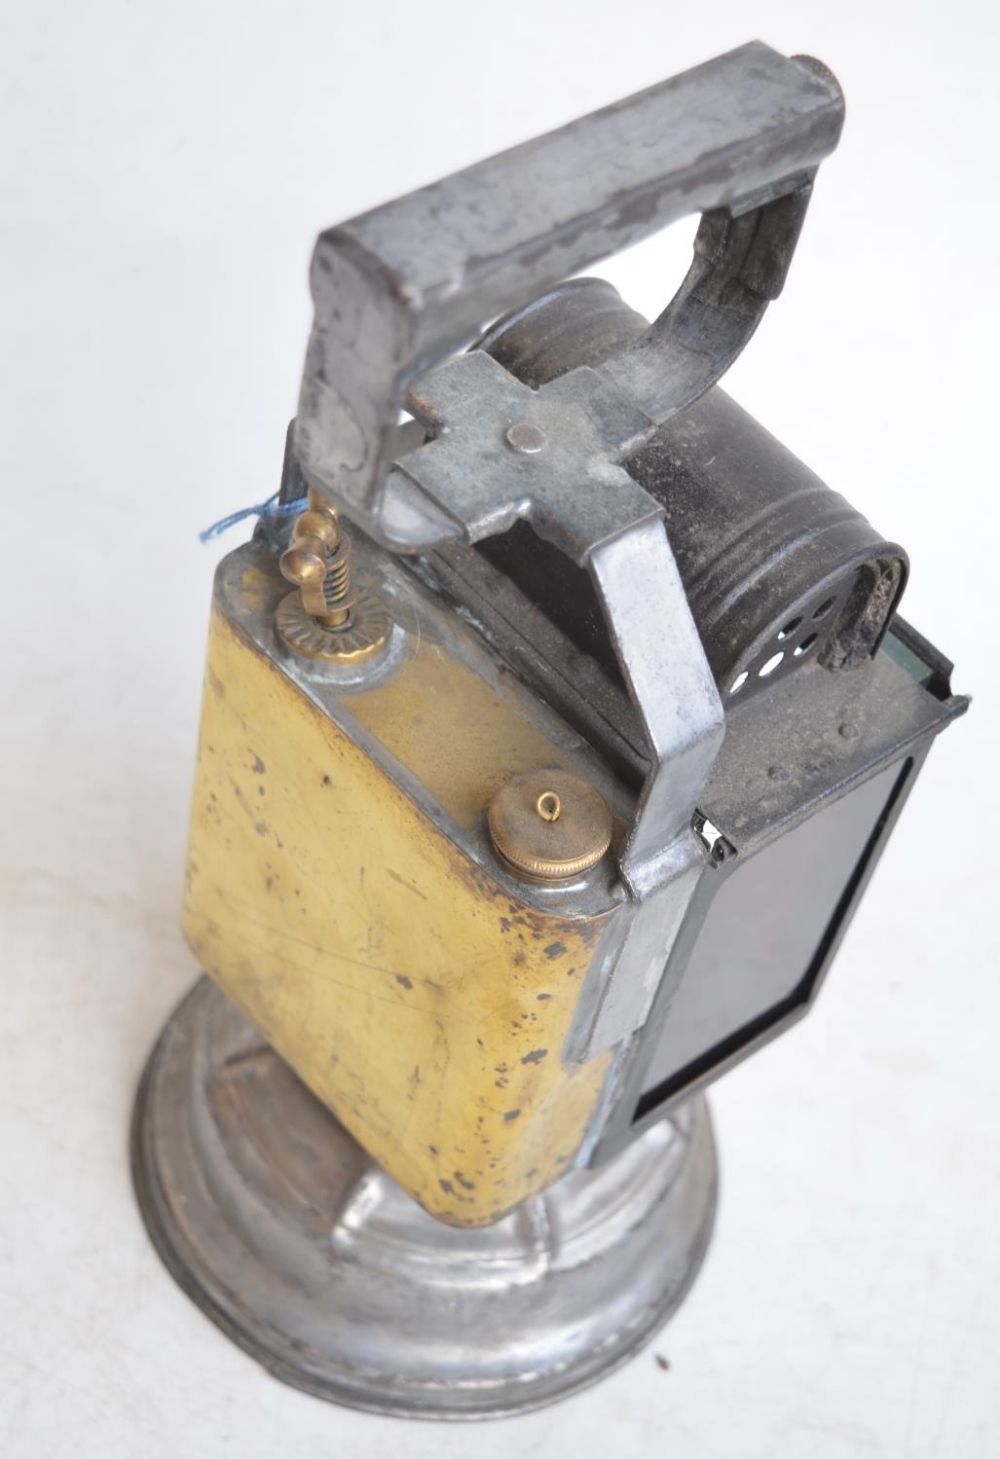 Albert Butine SNCF French railway carbide lantern, circa 1920-30s. Fixed carry handle, stamped top - Image 6 of 6